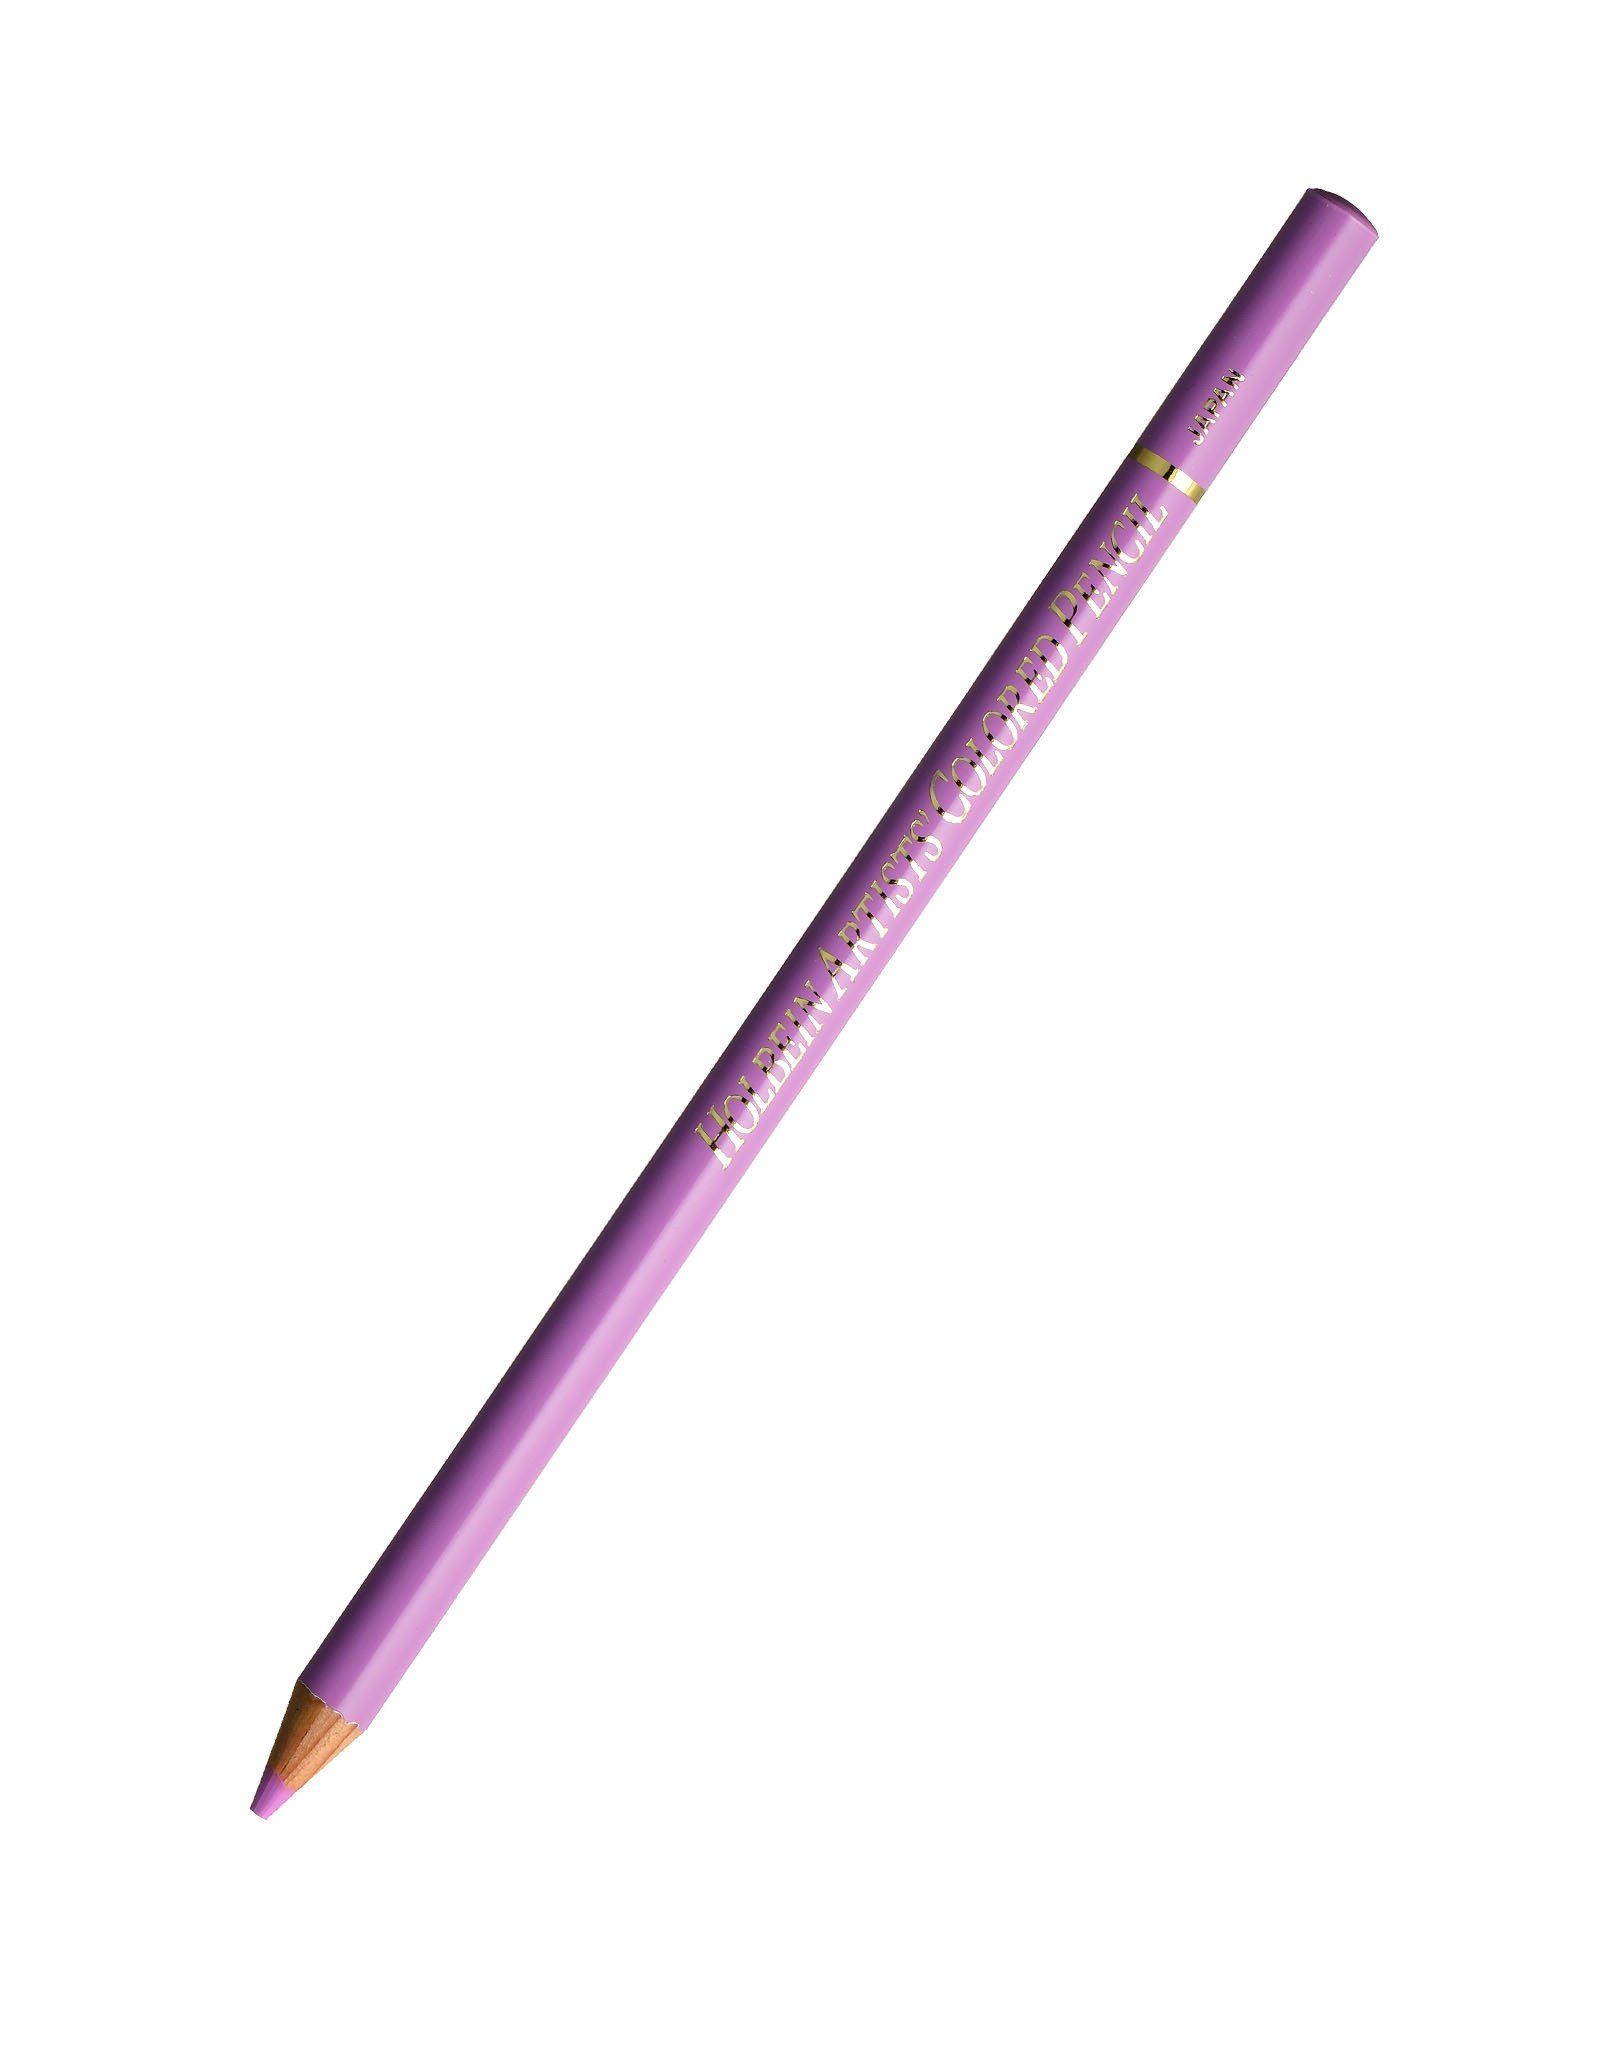 HOLBEIN Holbein Colored Pencil, Mauve